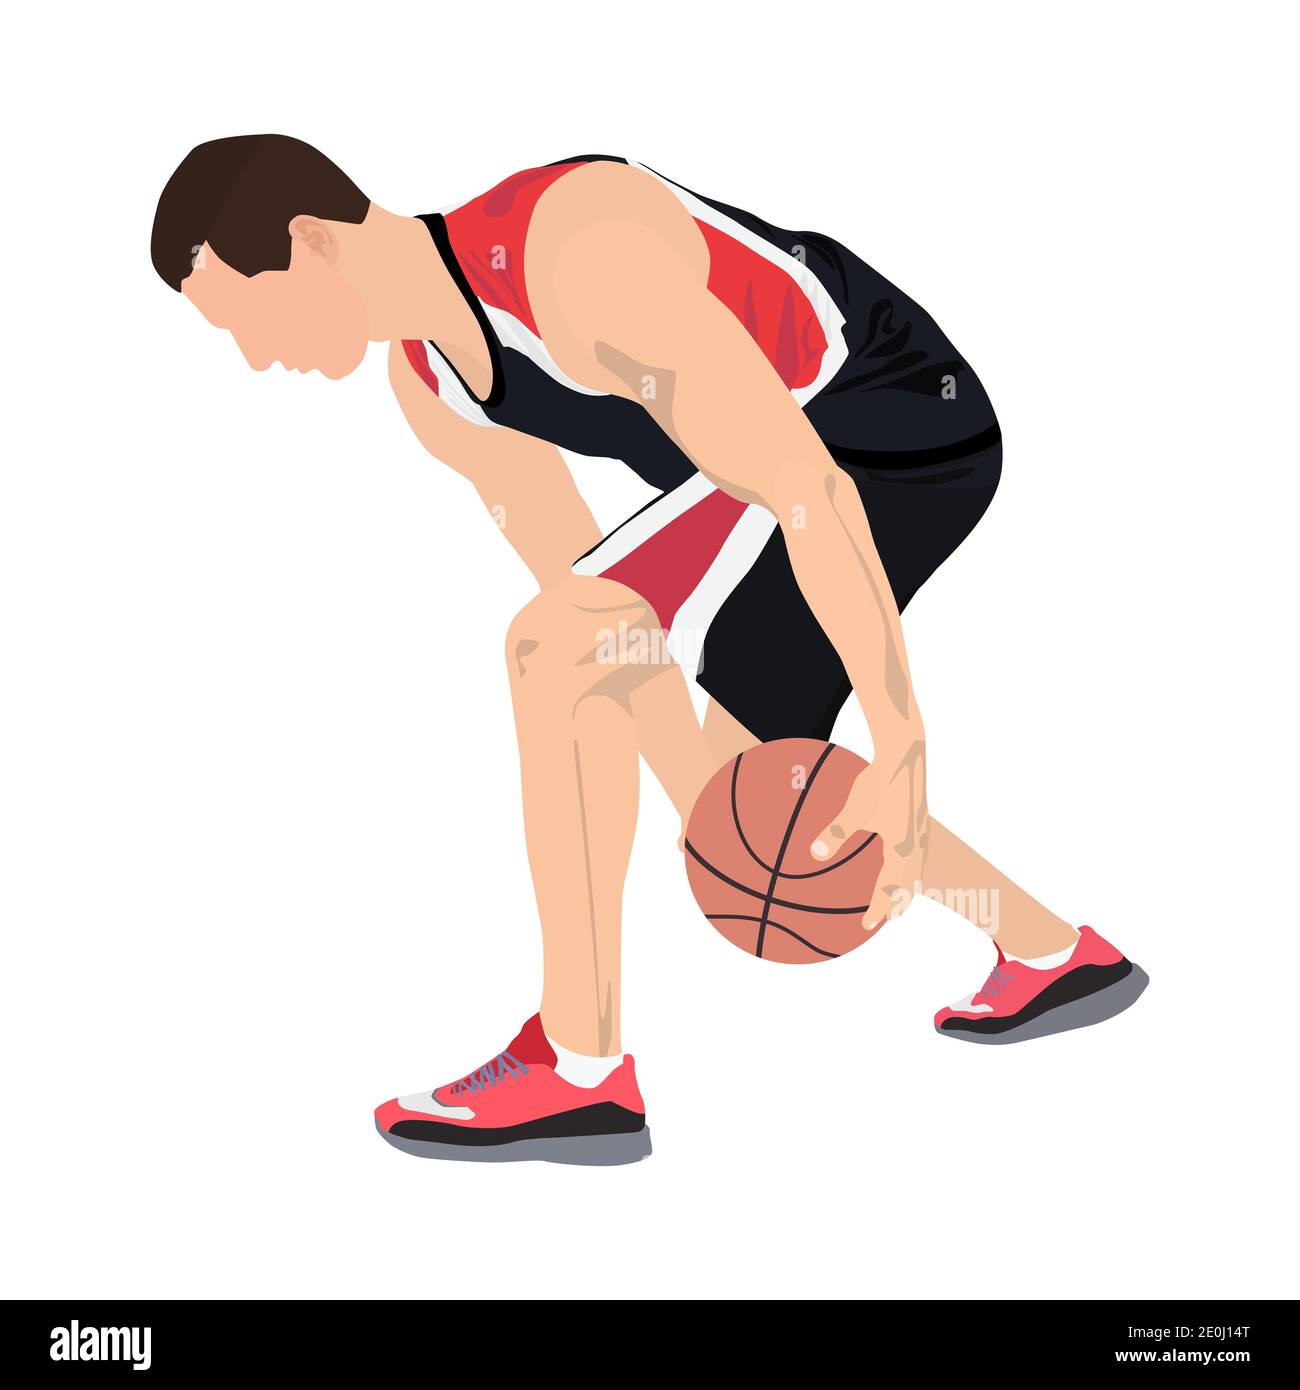 Professional basketball player with ball, vector illustration. Basketball crossover dribbling skills. Stock Vector